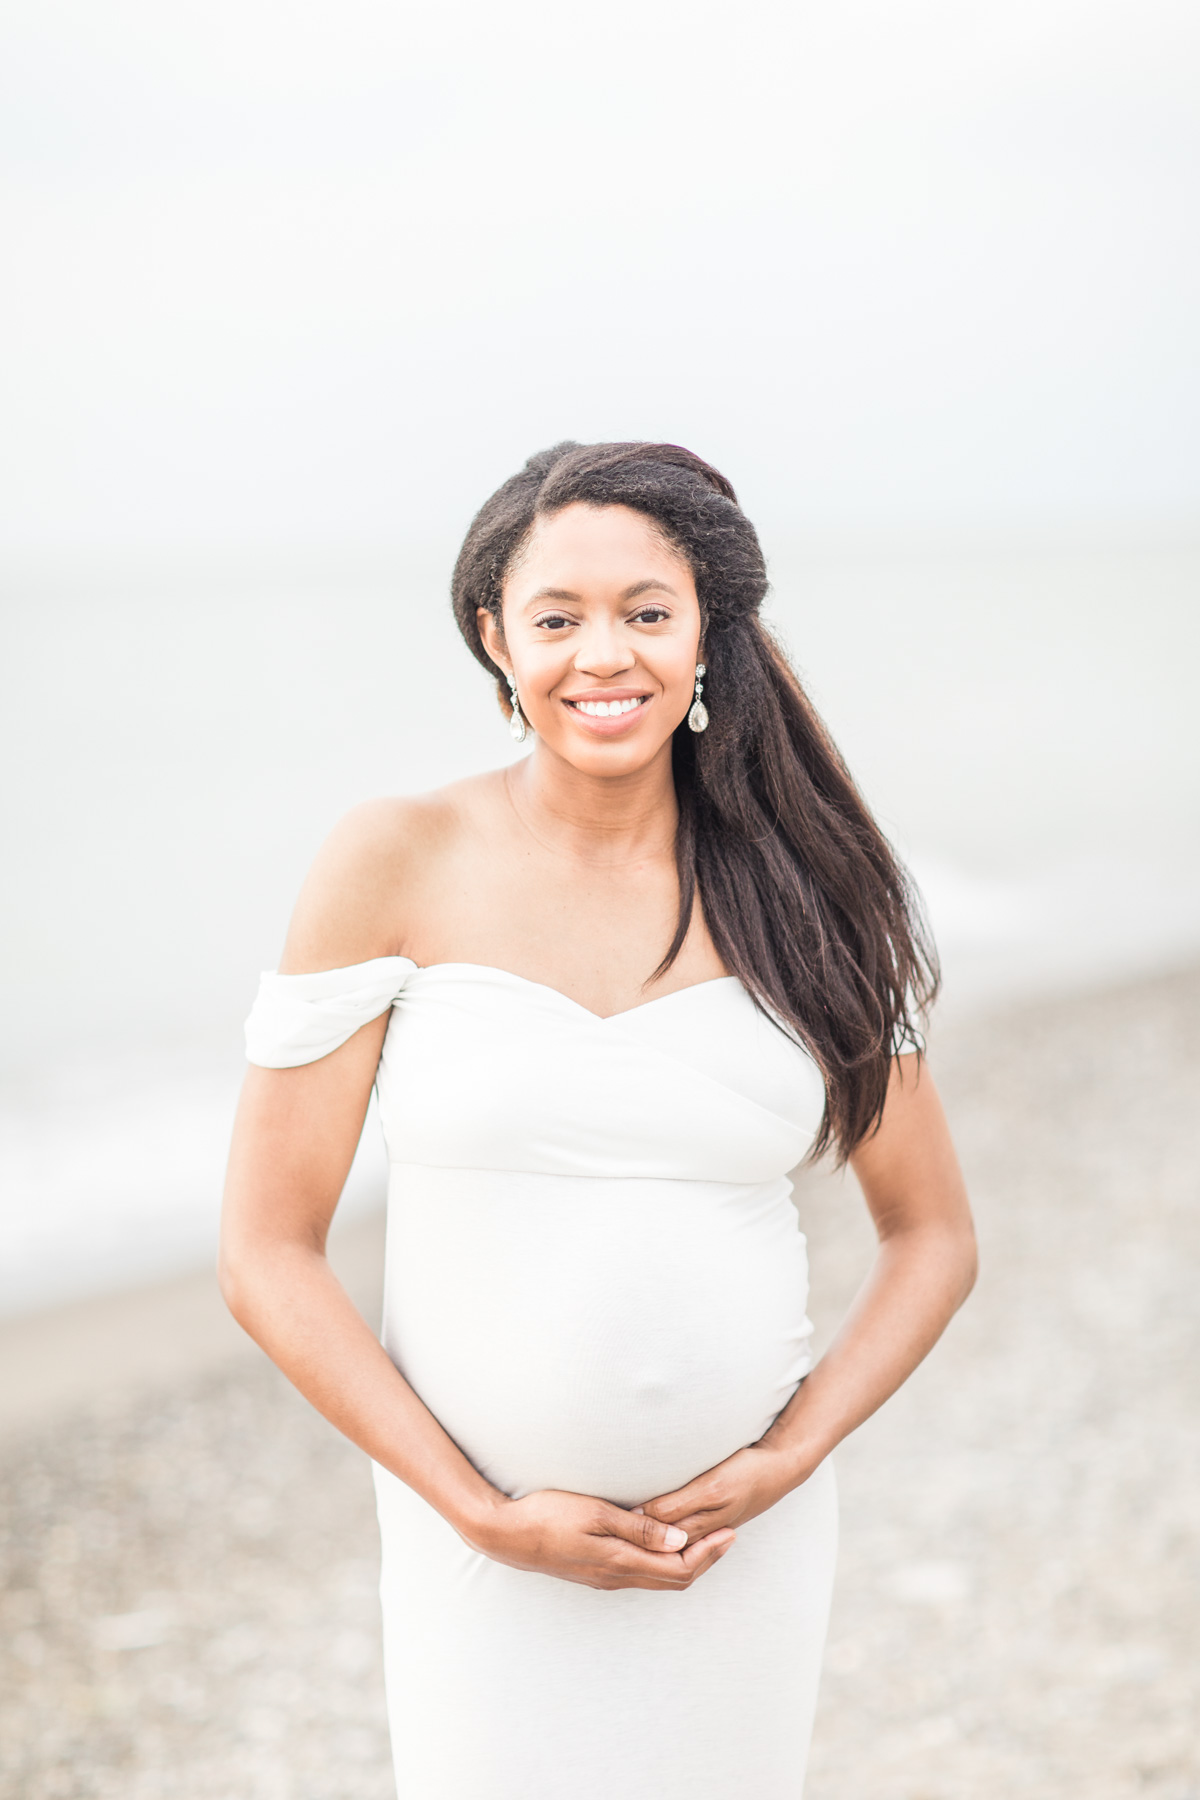 ERIN DAVISON PHOTOGRAPHY | Akron Maternity Photographers, Cleveland Maternity Photographer, Cleveland Newborn Photographers, Akron, Canton Ohio Maternity Photography, beach maternity session, organic baby photography, natural light, light and airy, film maternity